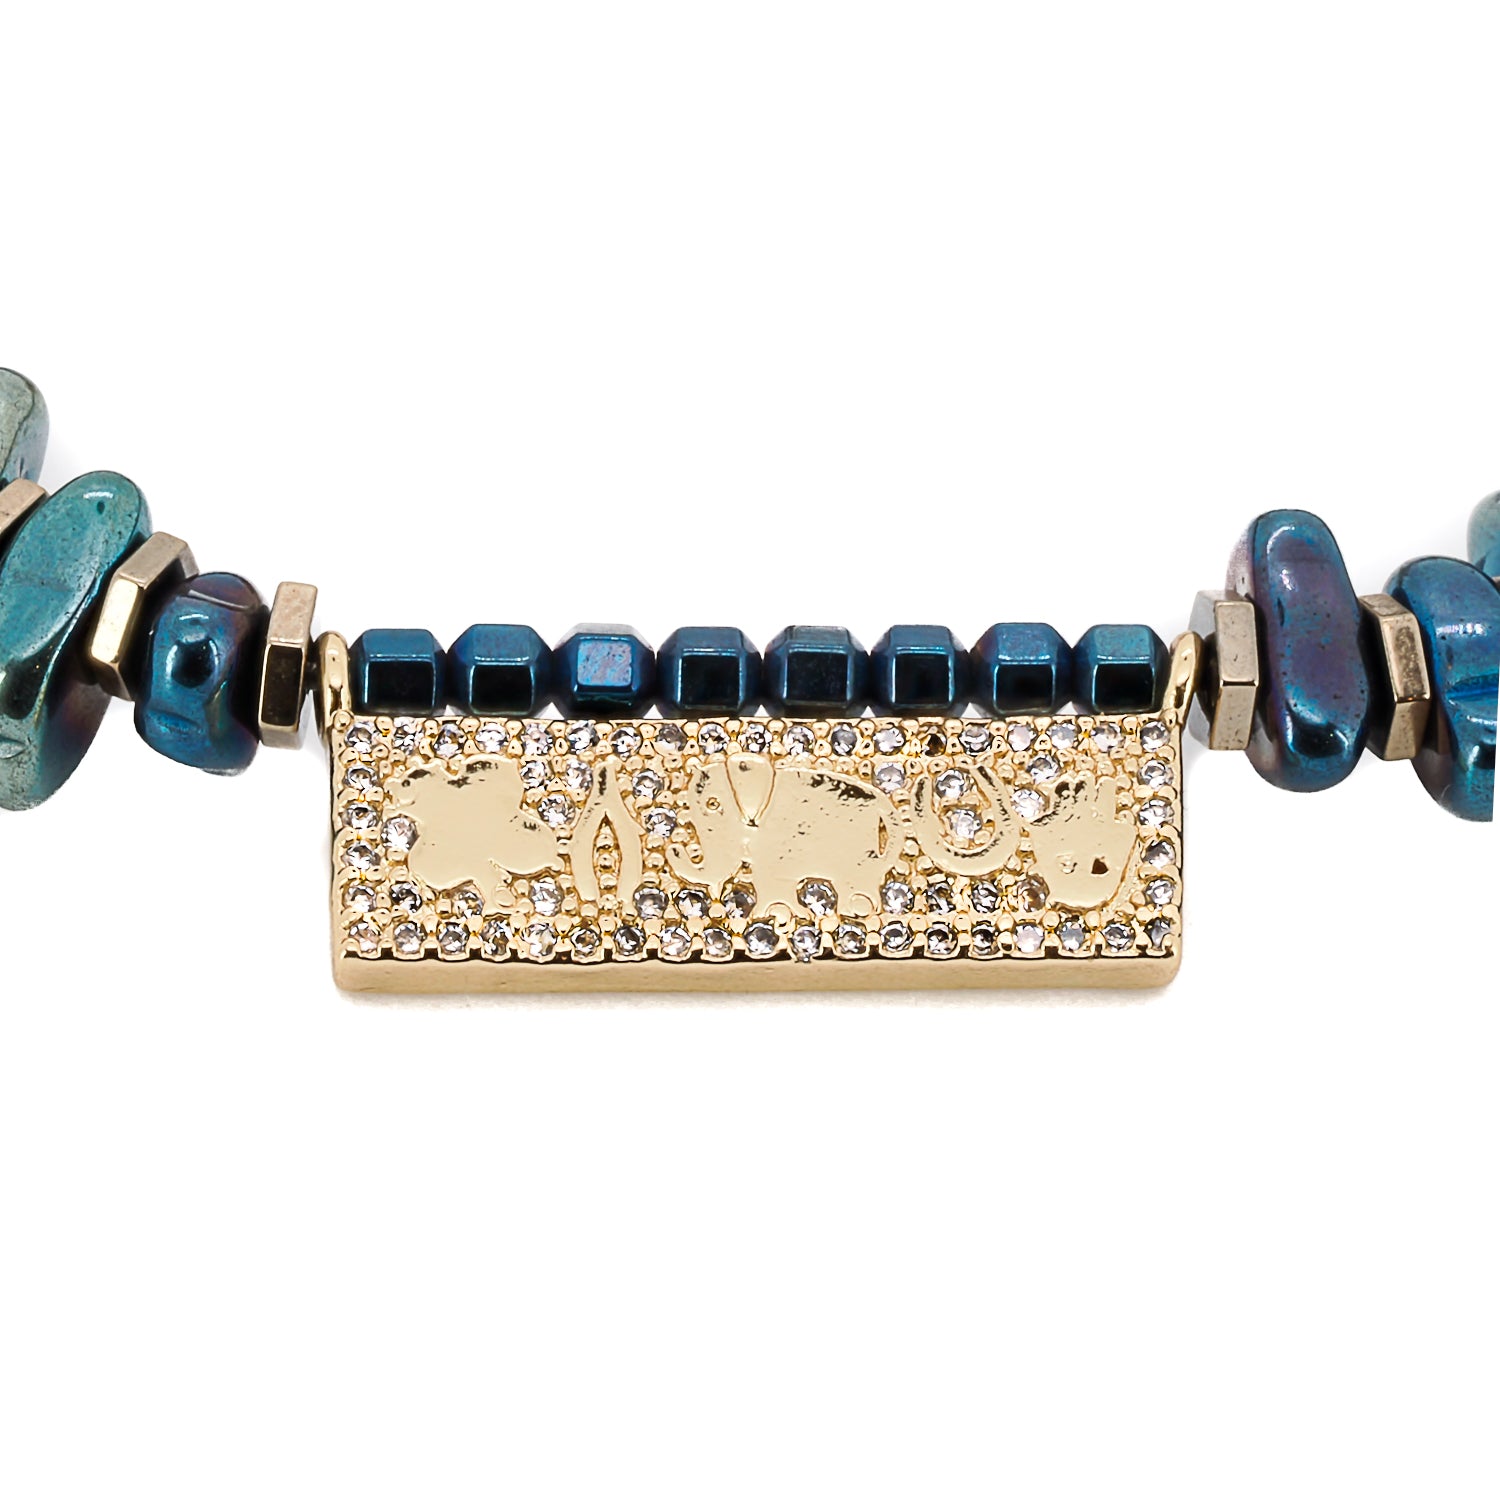 Find protection and attract luck with the Protection & Luck Blue Hematite Bracelet, a handcrafted talisman with a stylish design.